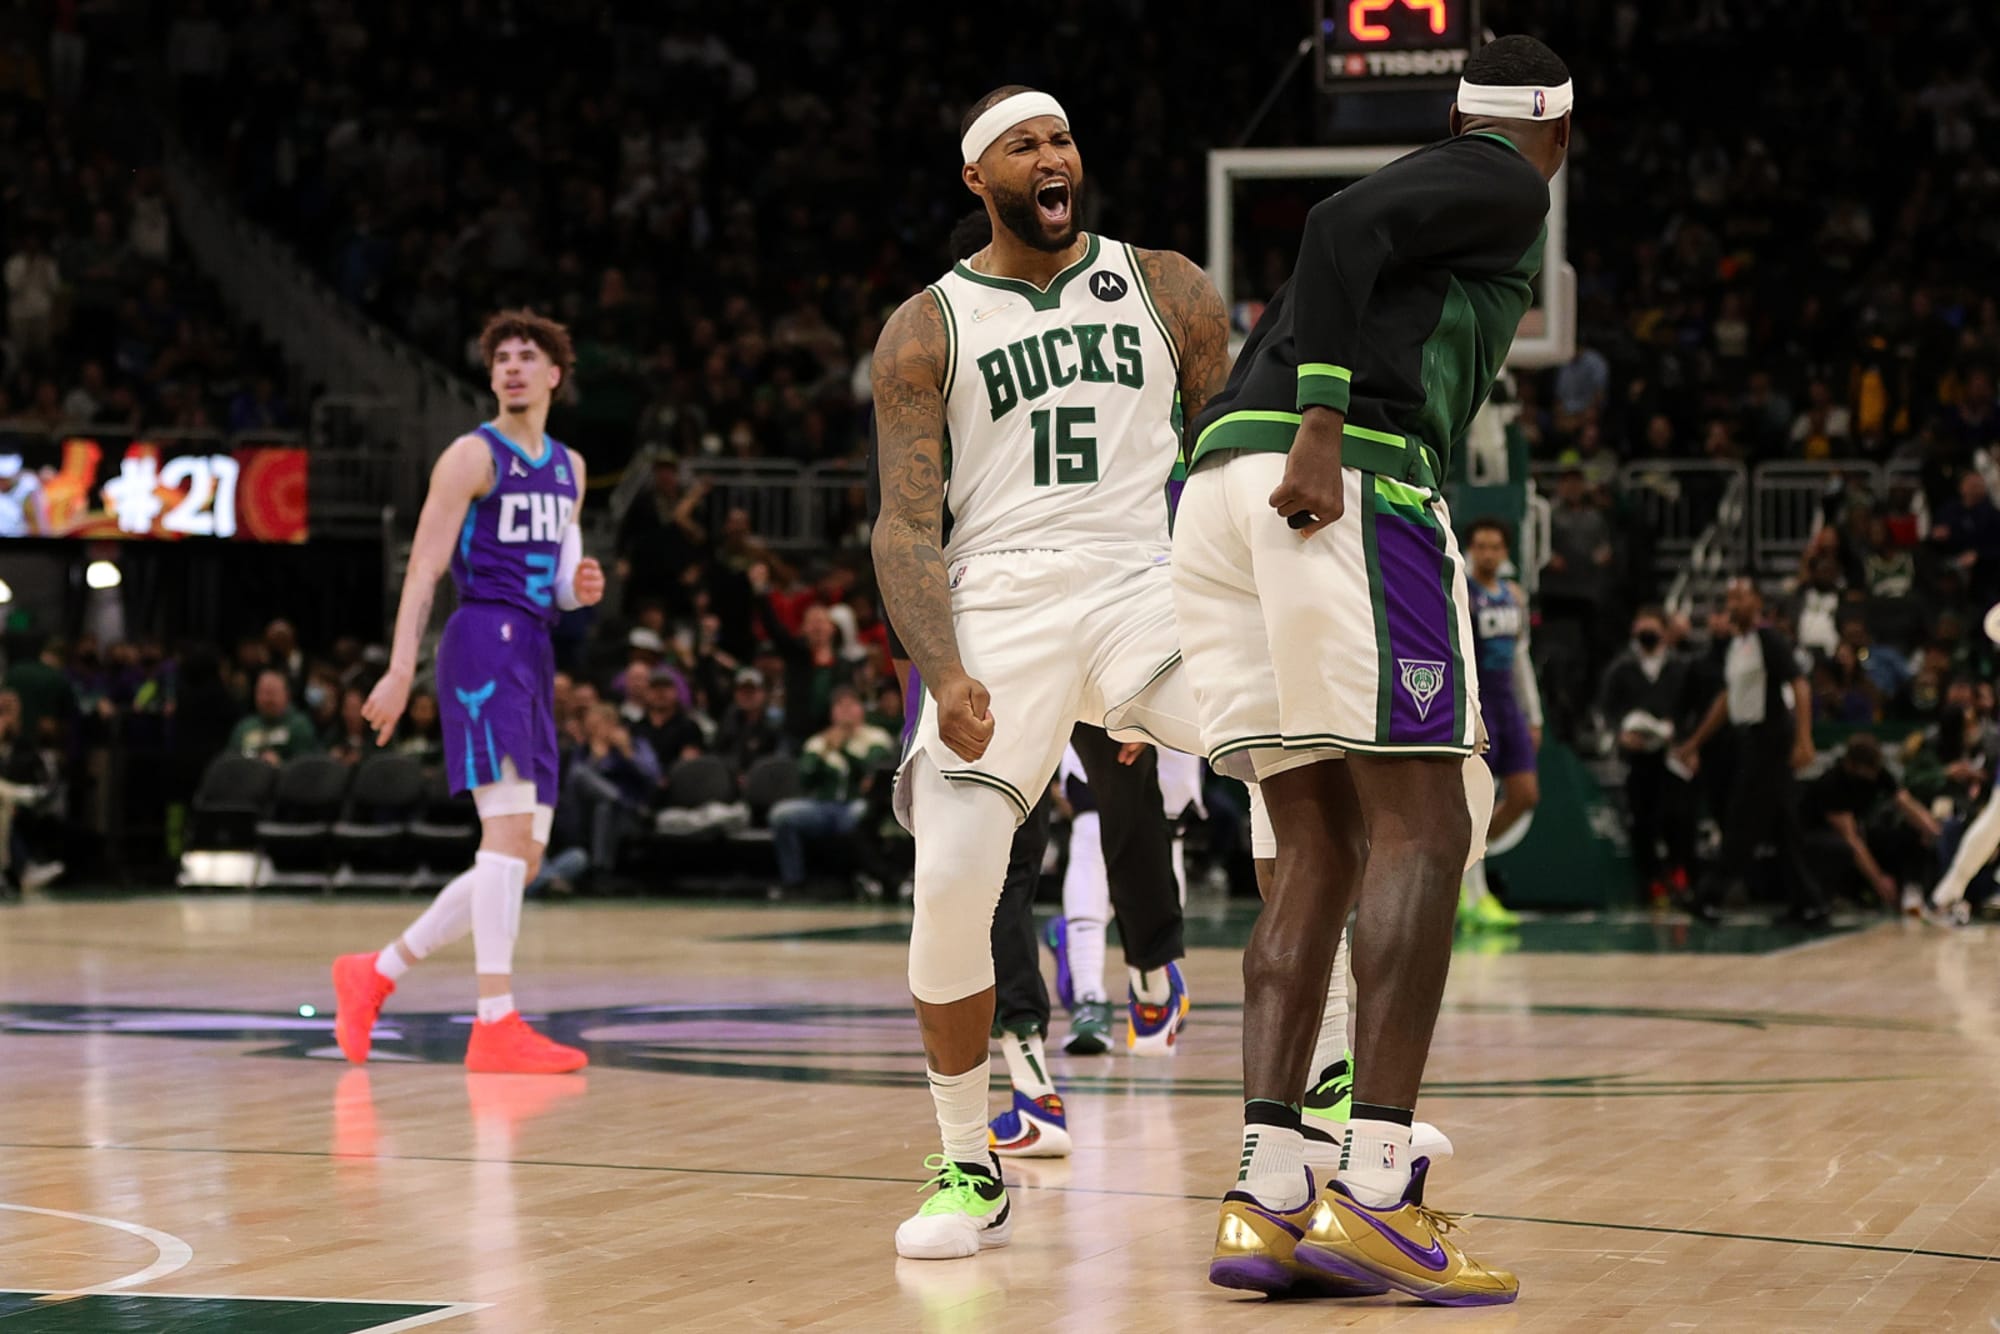 Despite playing just 17 games for the Bucks, DeMarcus Cousins was an immensely popular player in Milwaukee, and he is now a free agent once again.